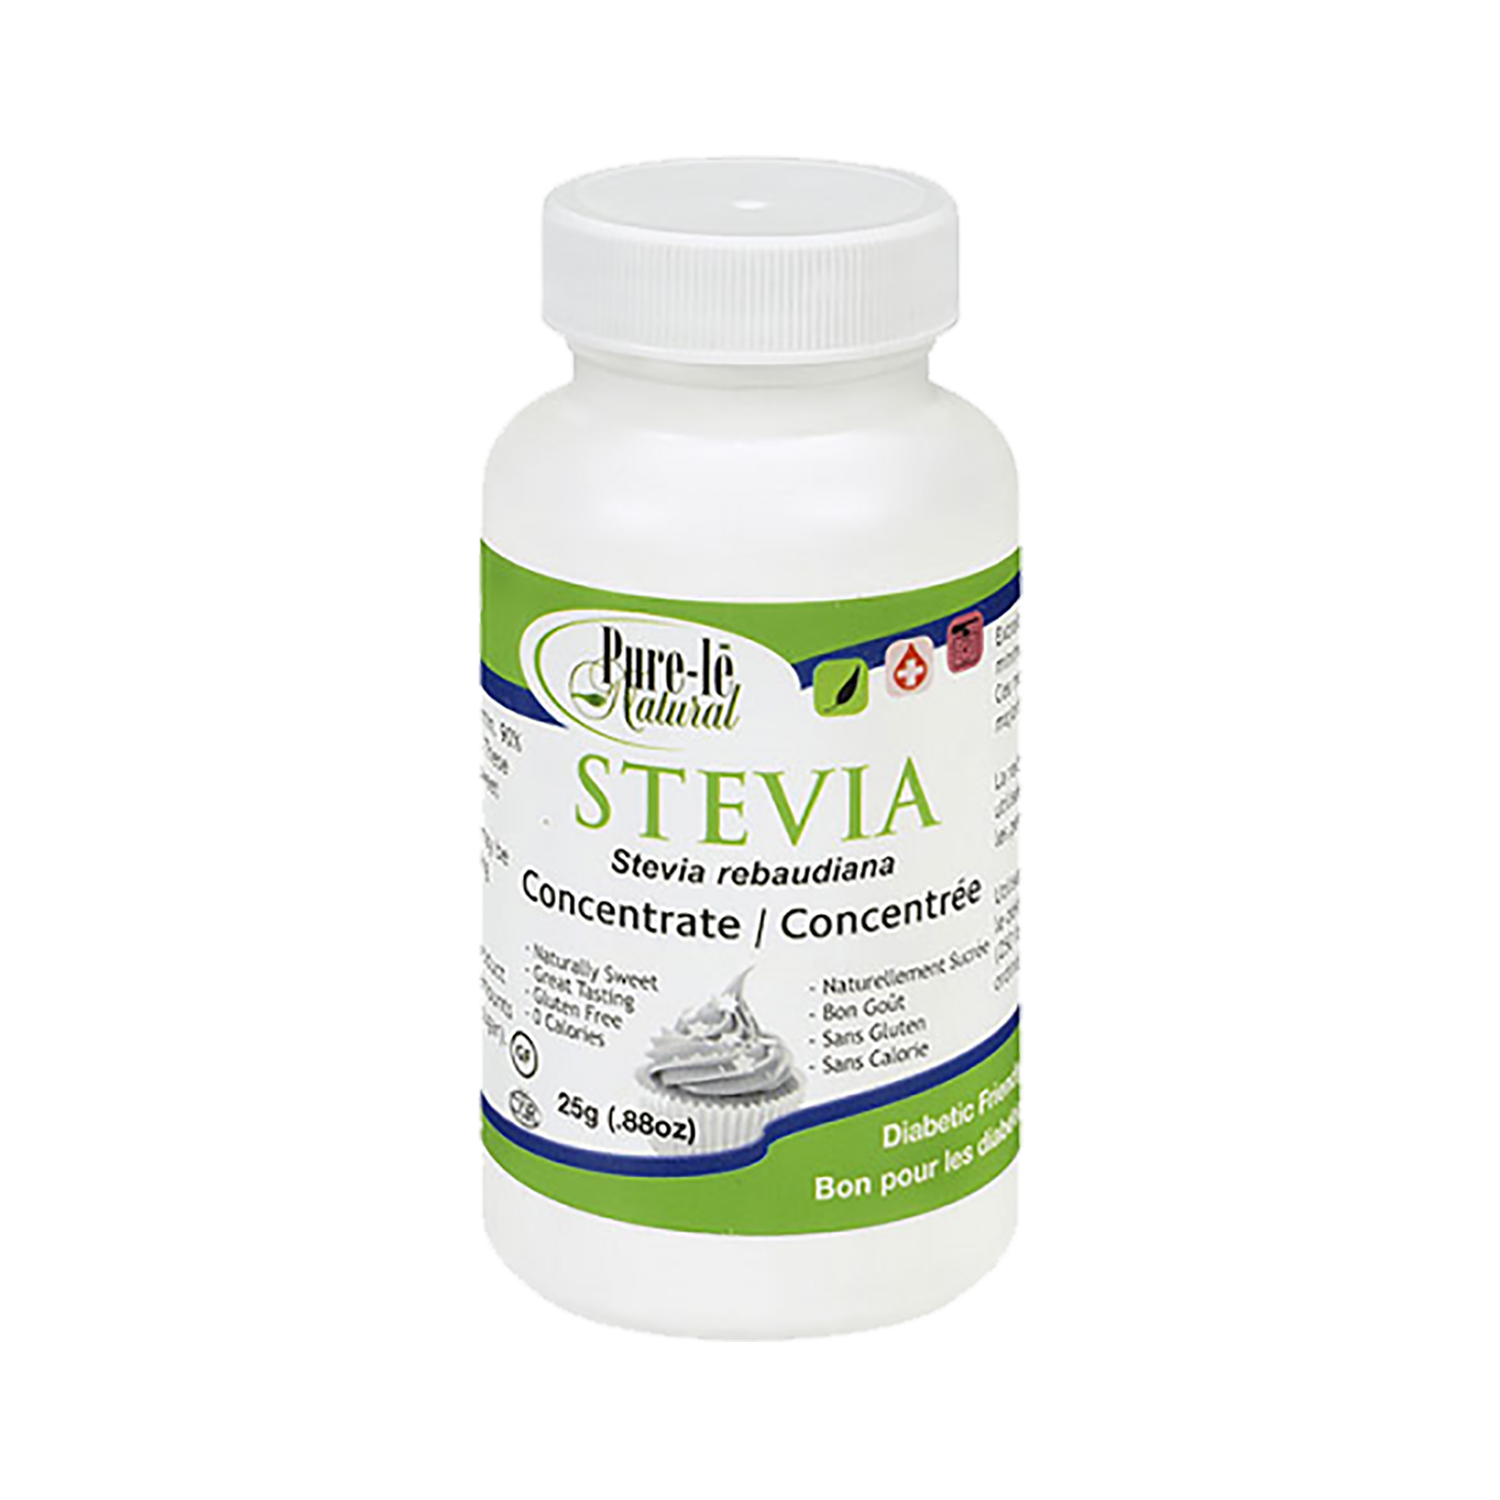 Pure-le Natural Stevia Concentrated Powder - (25g)